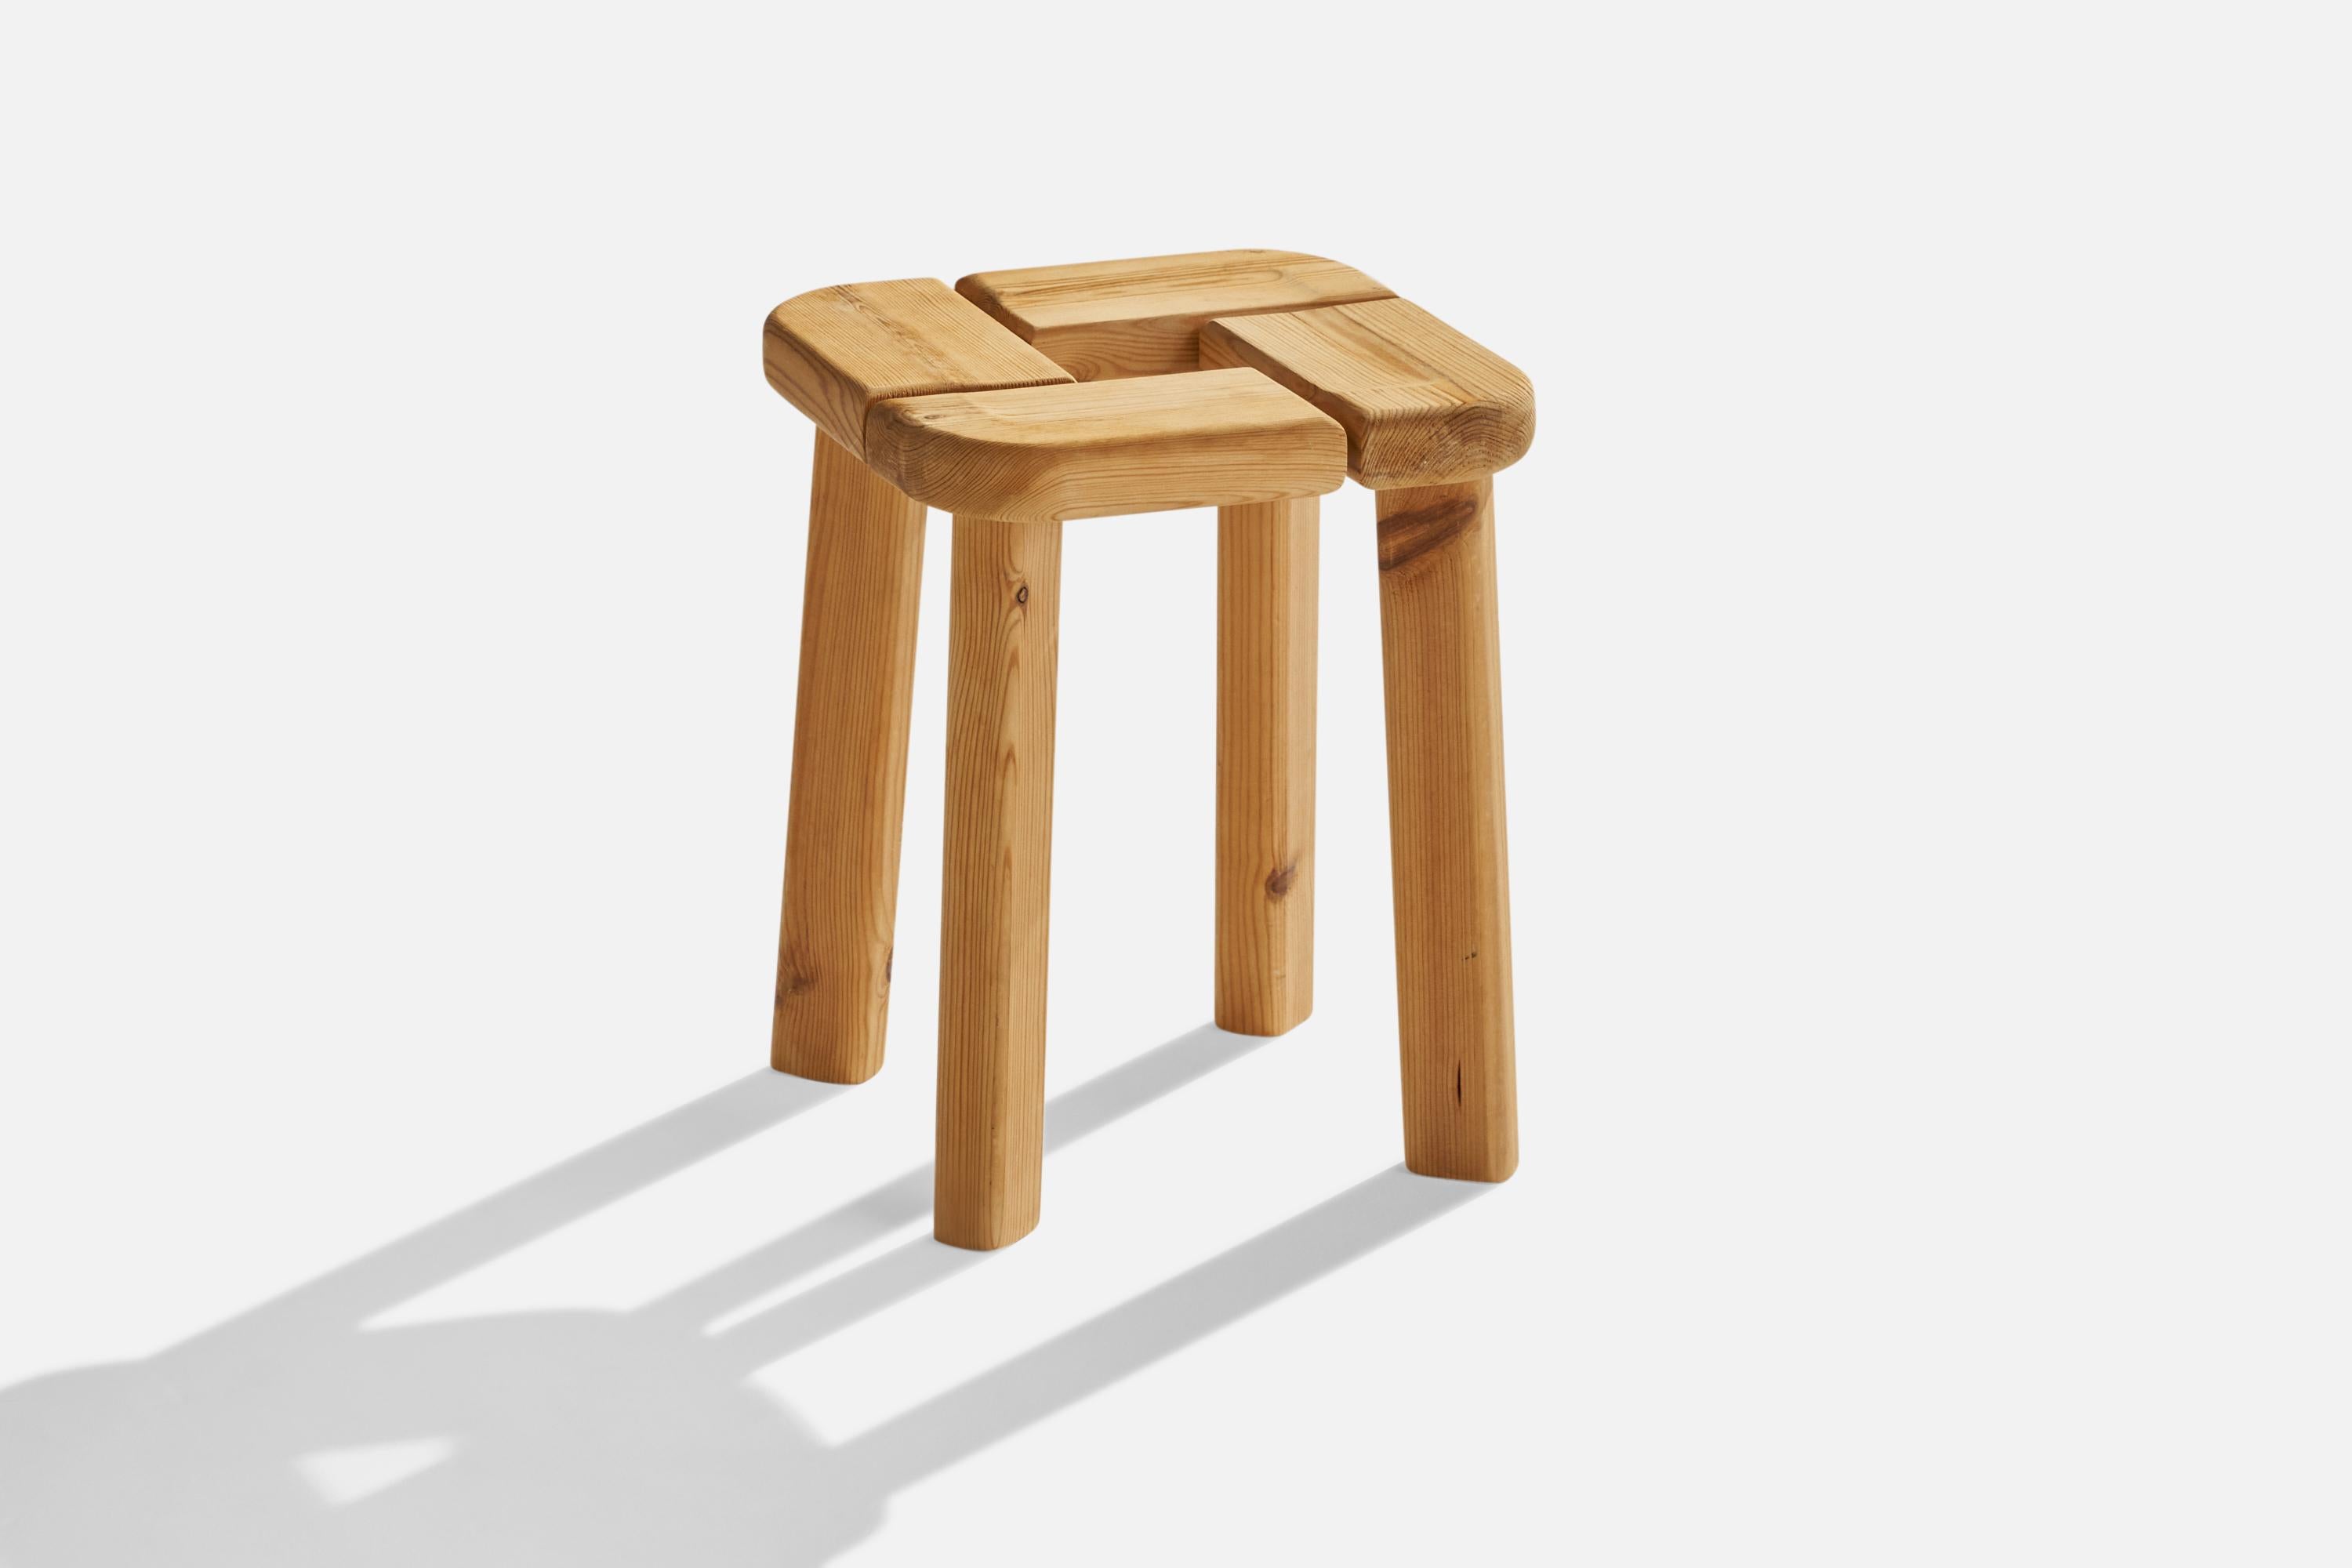 A pine stool designed and produced in Finland, c. 1970s.

seat height: 15.75